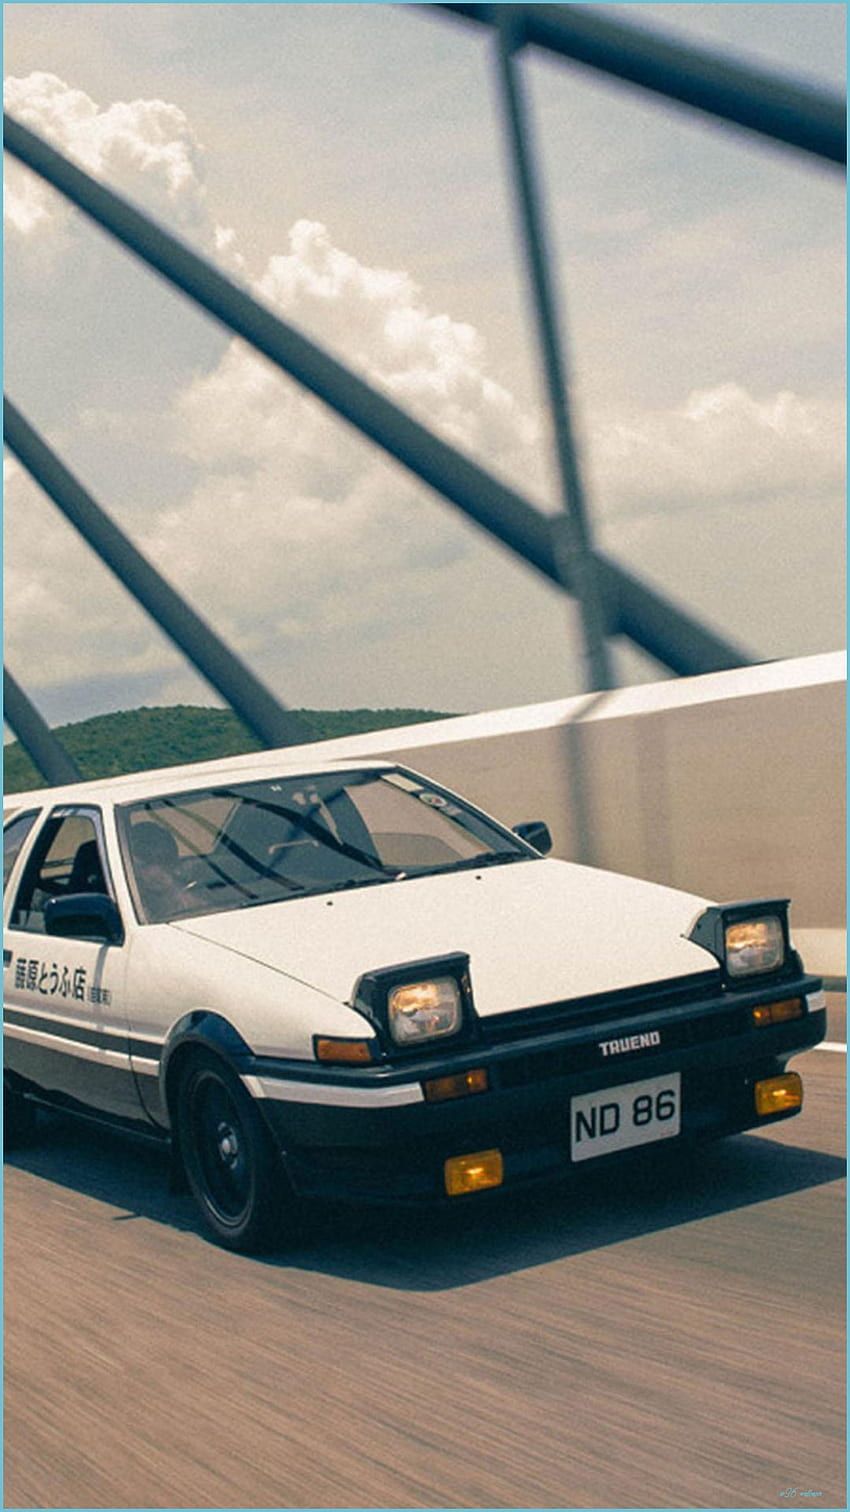 A white car with the license plate ND 86 is driving on a road. - Toyota AE86